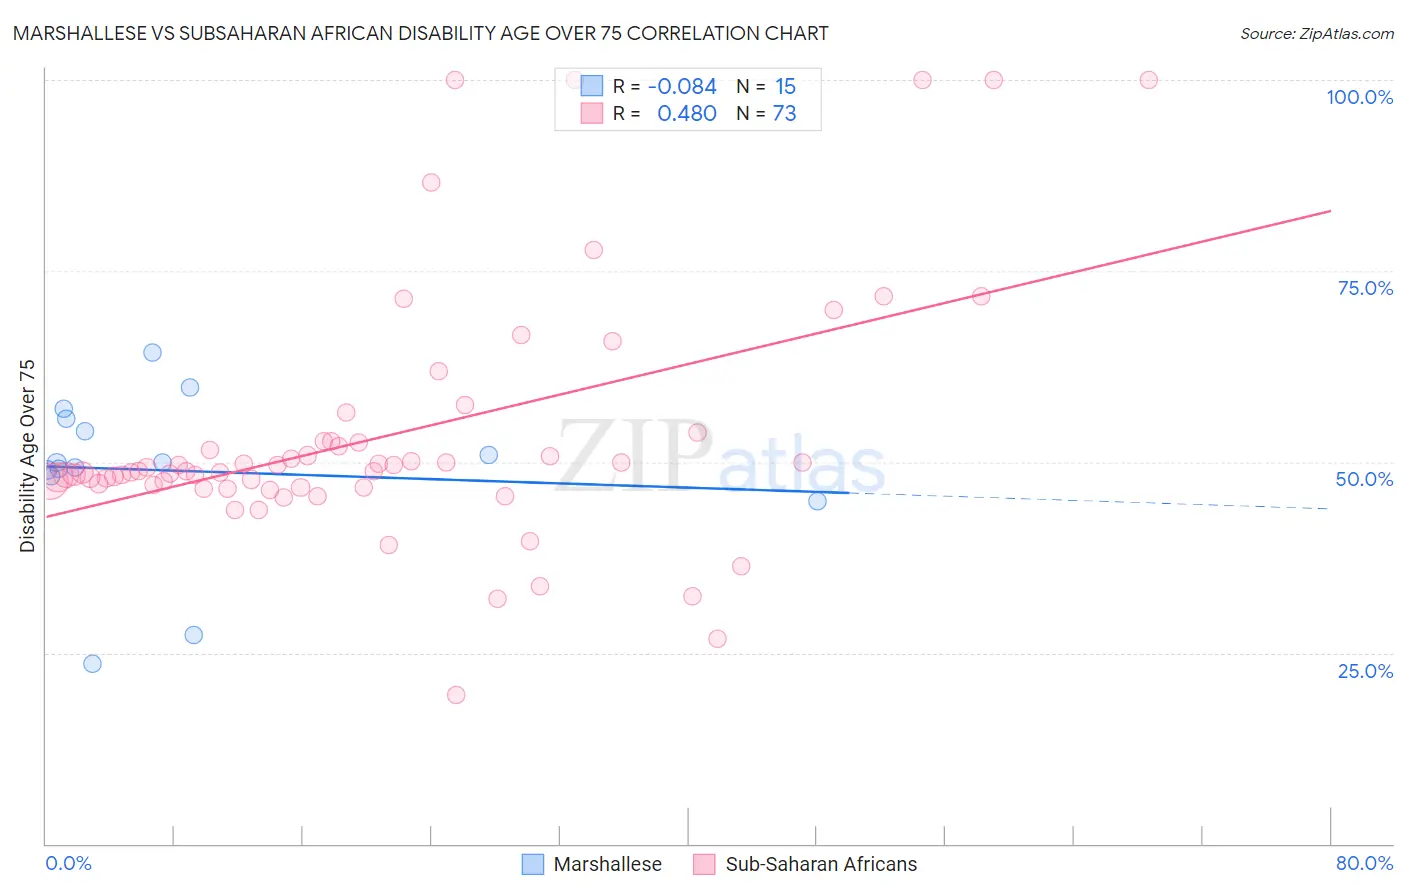 Marshallese vs Subsaharan African Disability Age Over 75